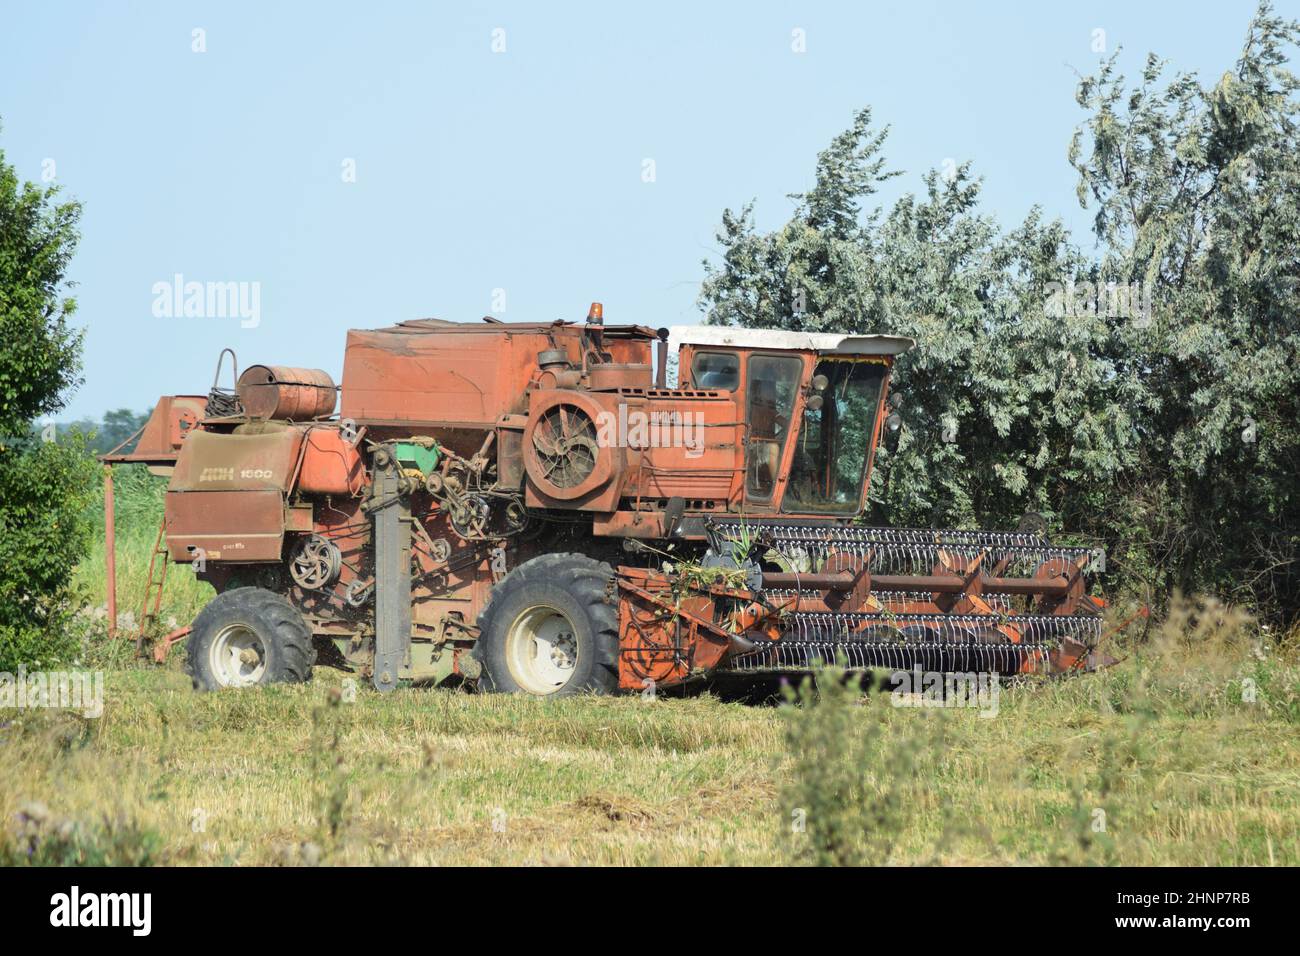 Combine harvesters. Agricultural machinery. Stock Photo